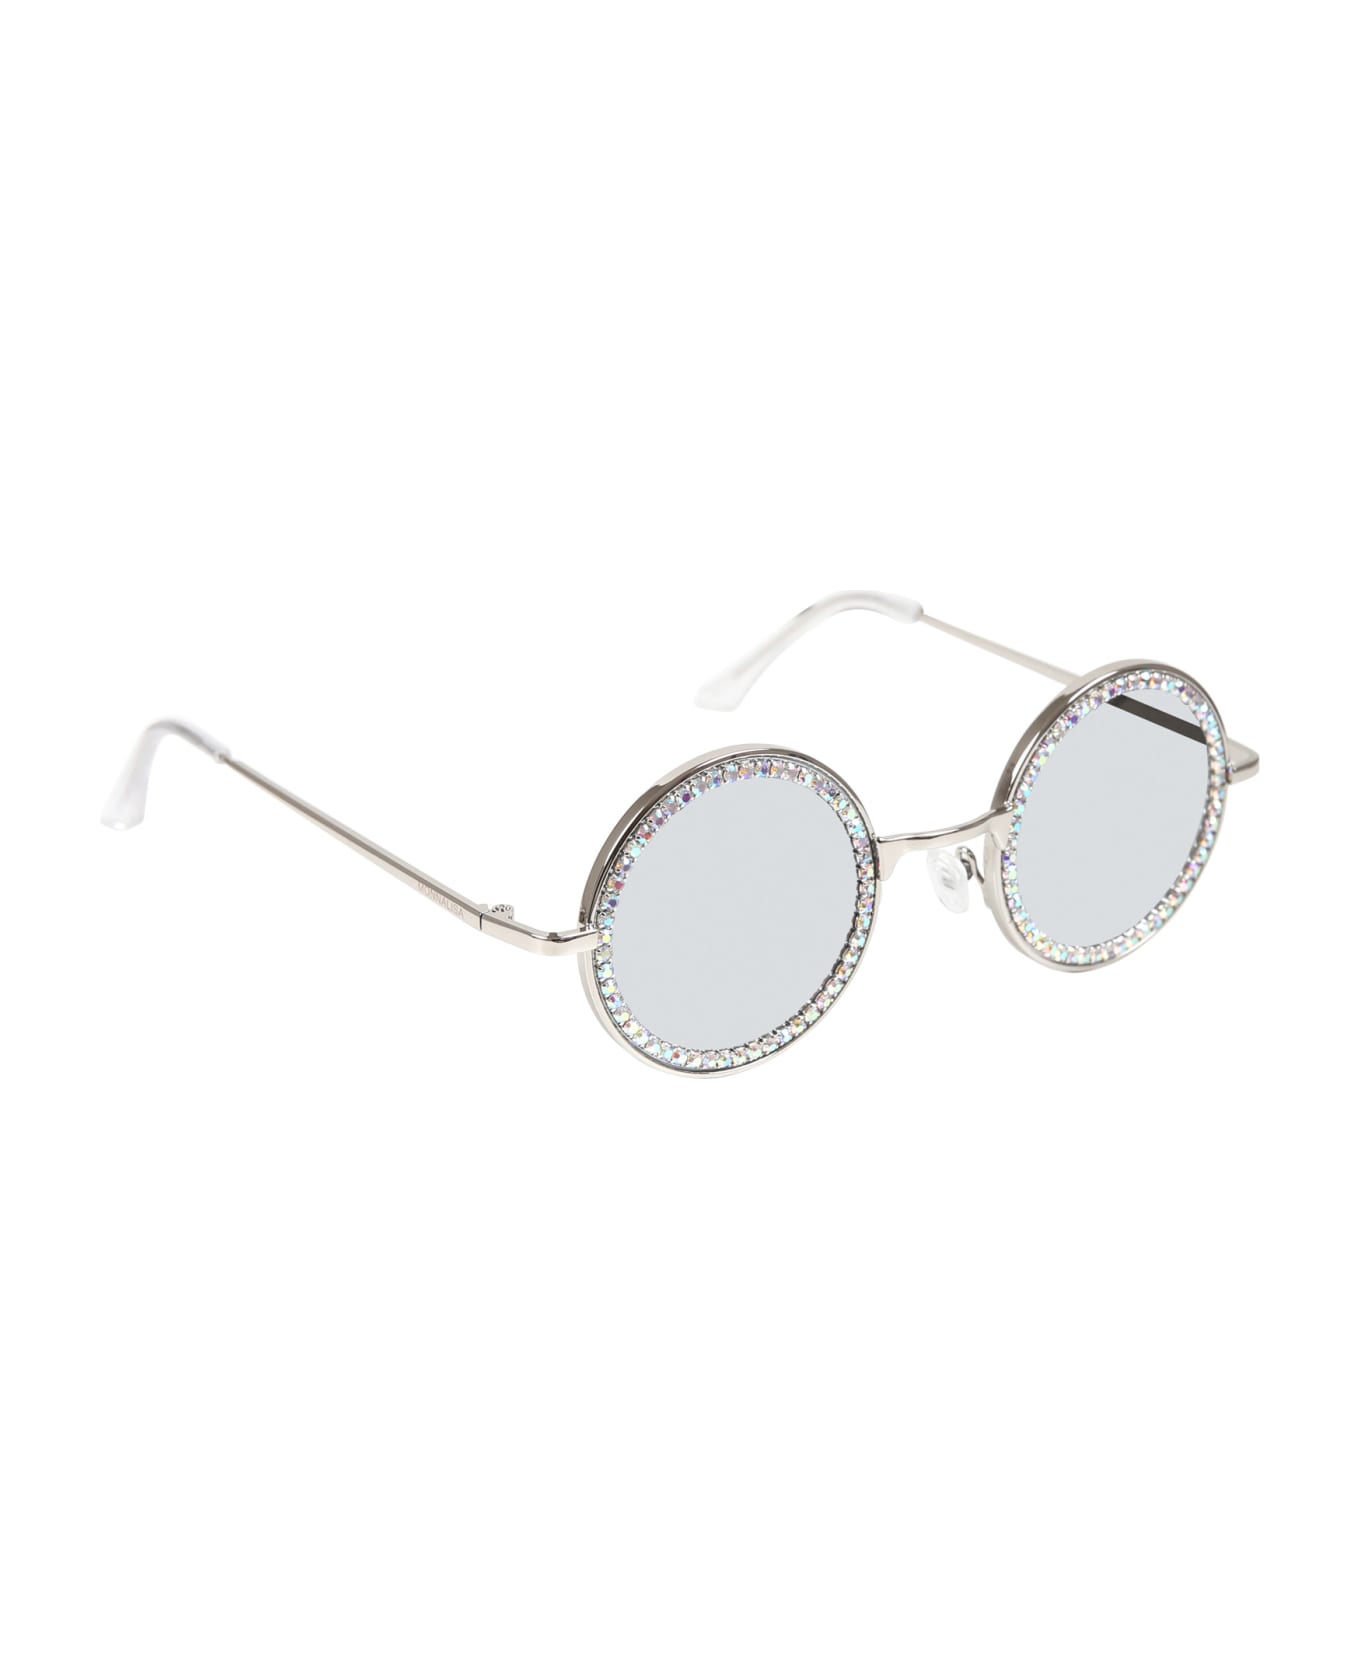 Monnalisa Silver Glasses For Girl With Rhinestones - Bianco アクセサリー＆ギフト